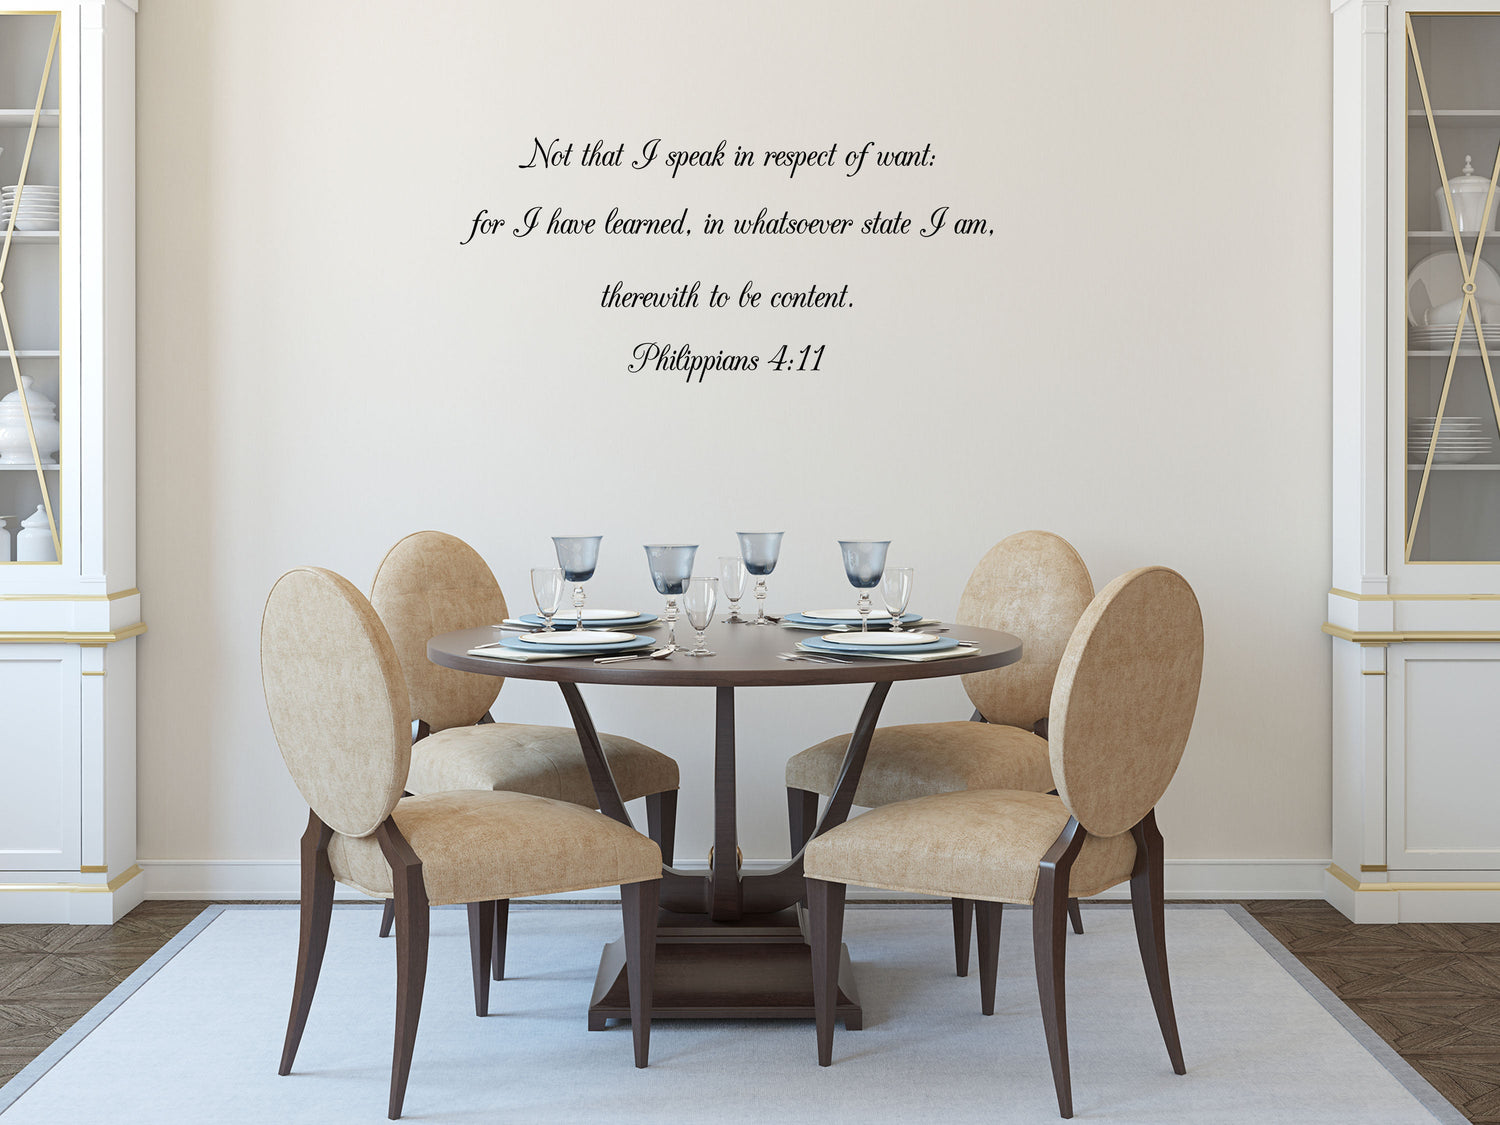 Philippians 4:11 - Scripture Wall Decals - Decal Wall Stickers Vinyl Wall Decal Inspirational Wall Signs 